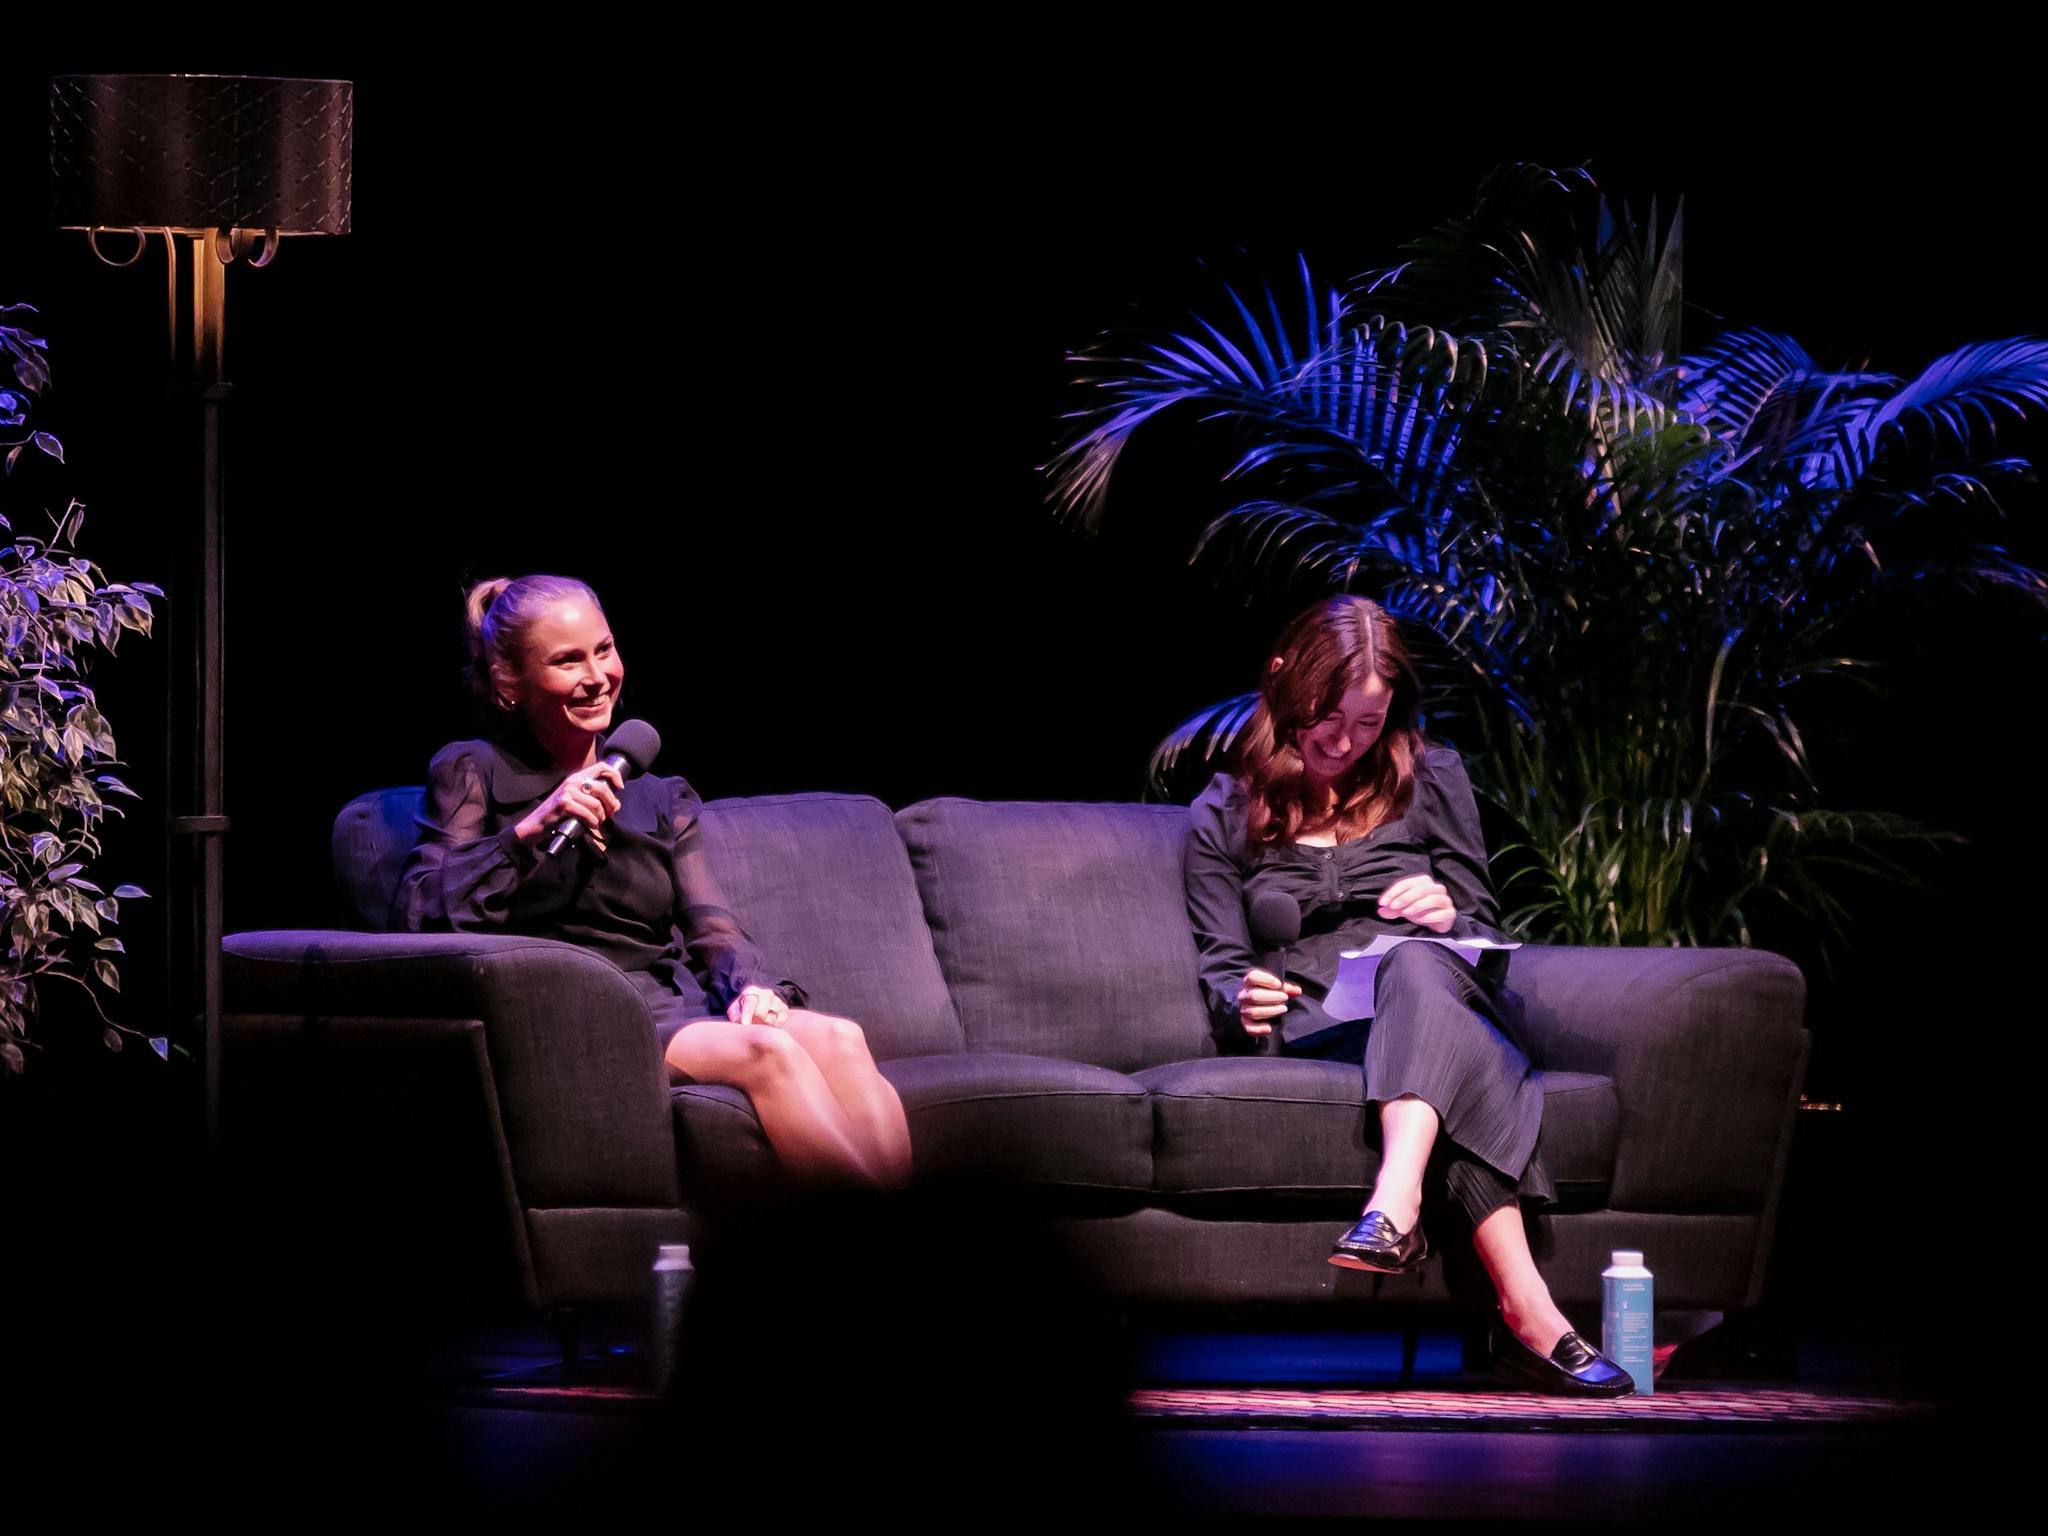 Activist Grace Tame sits beside event host Maddison Connaughton on a lounge on stage.